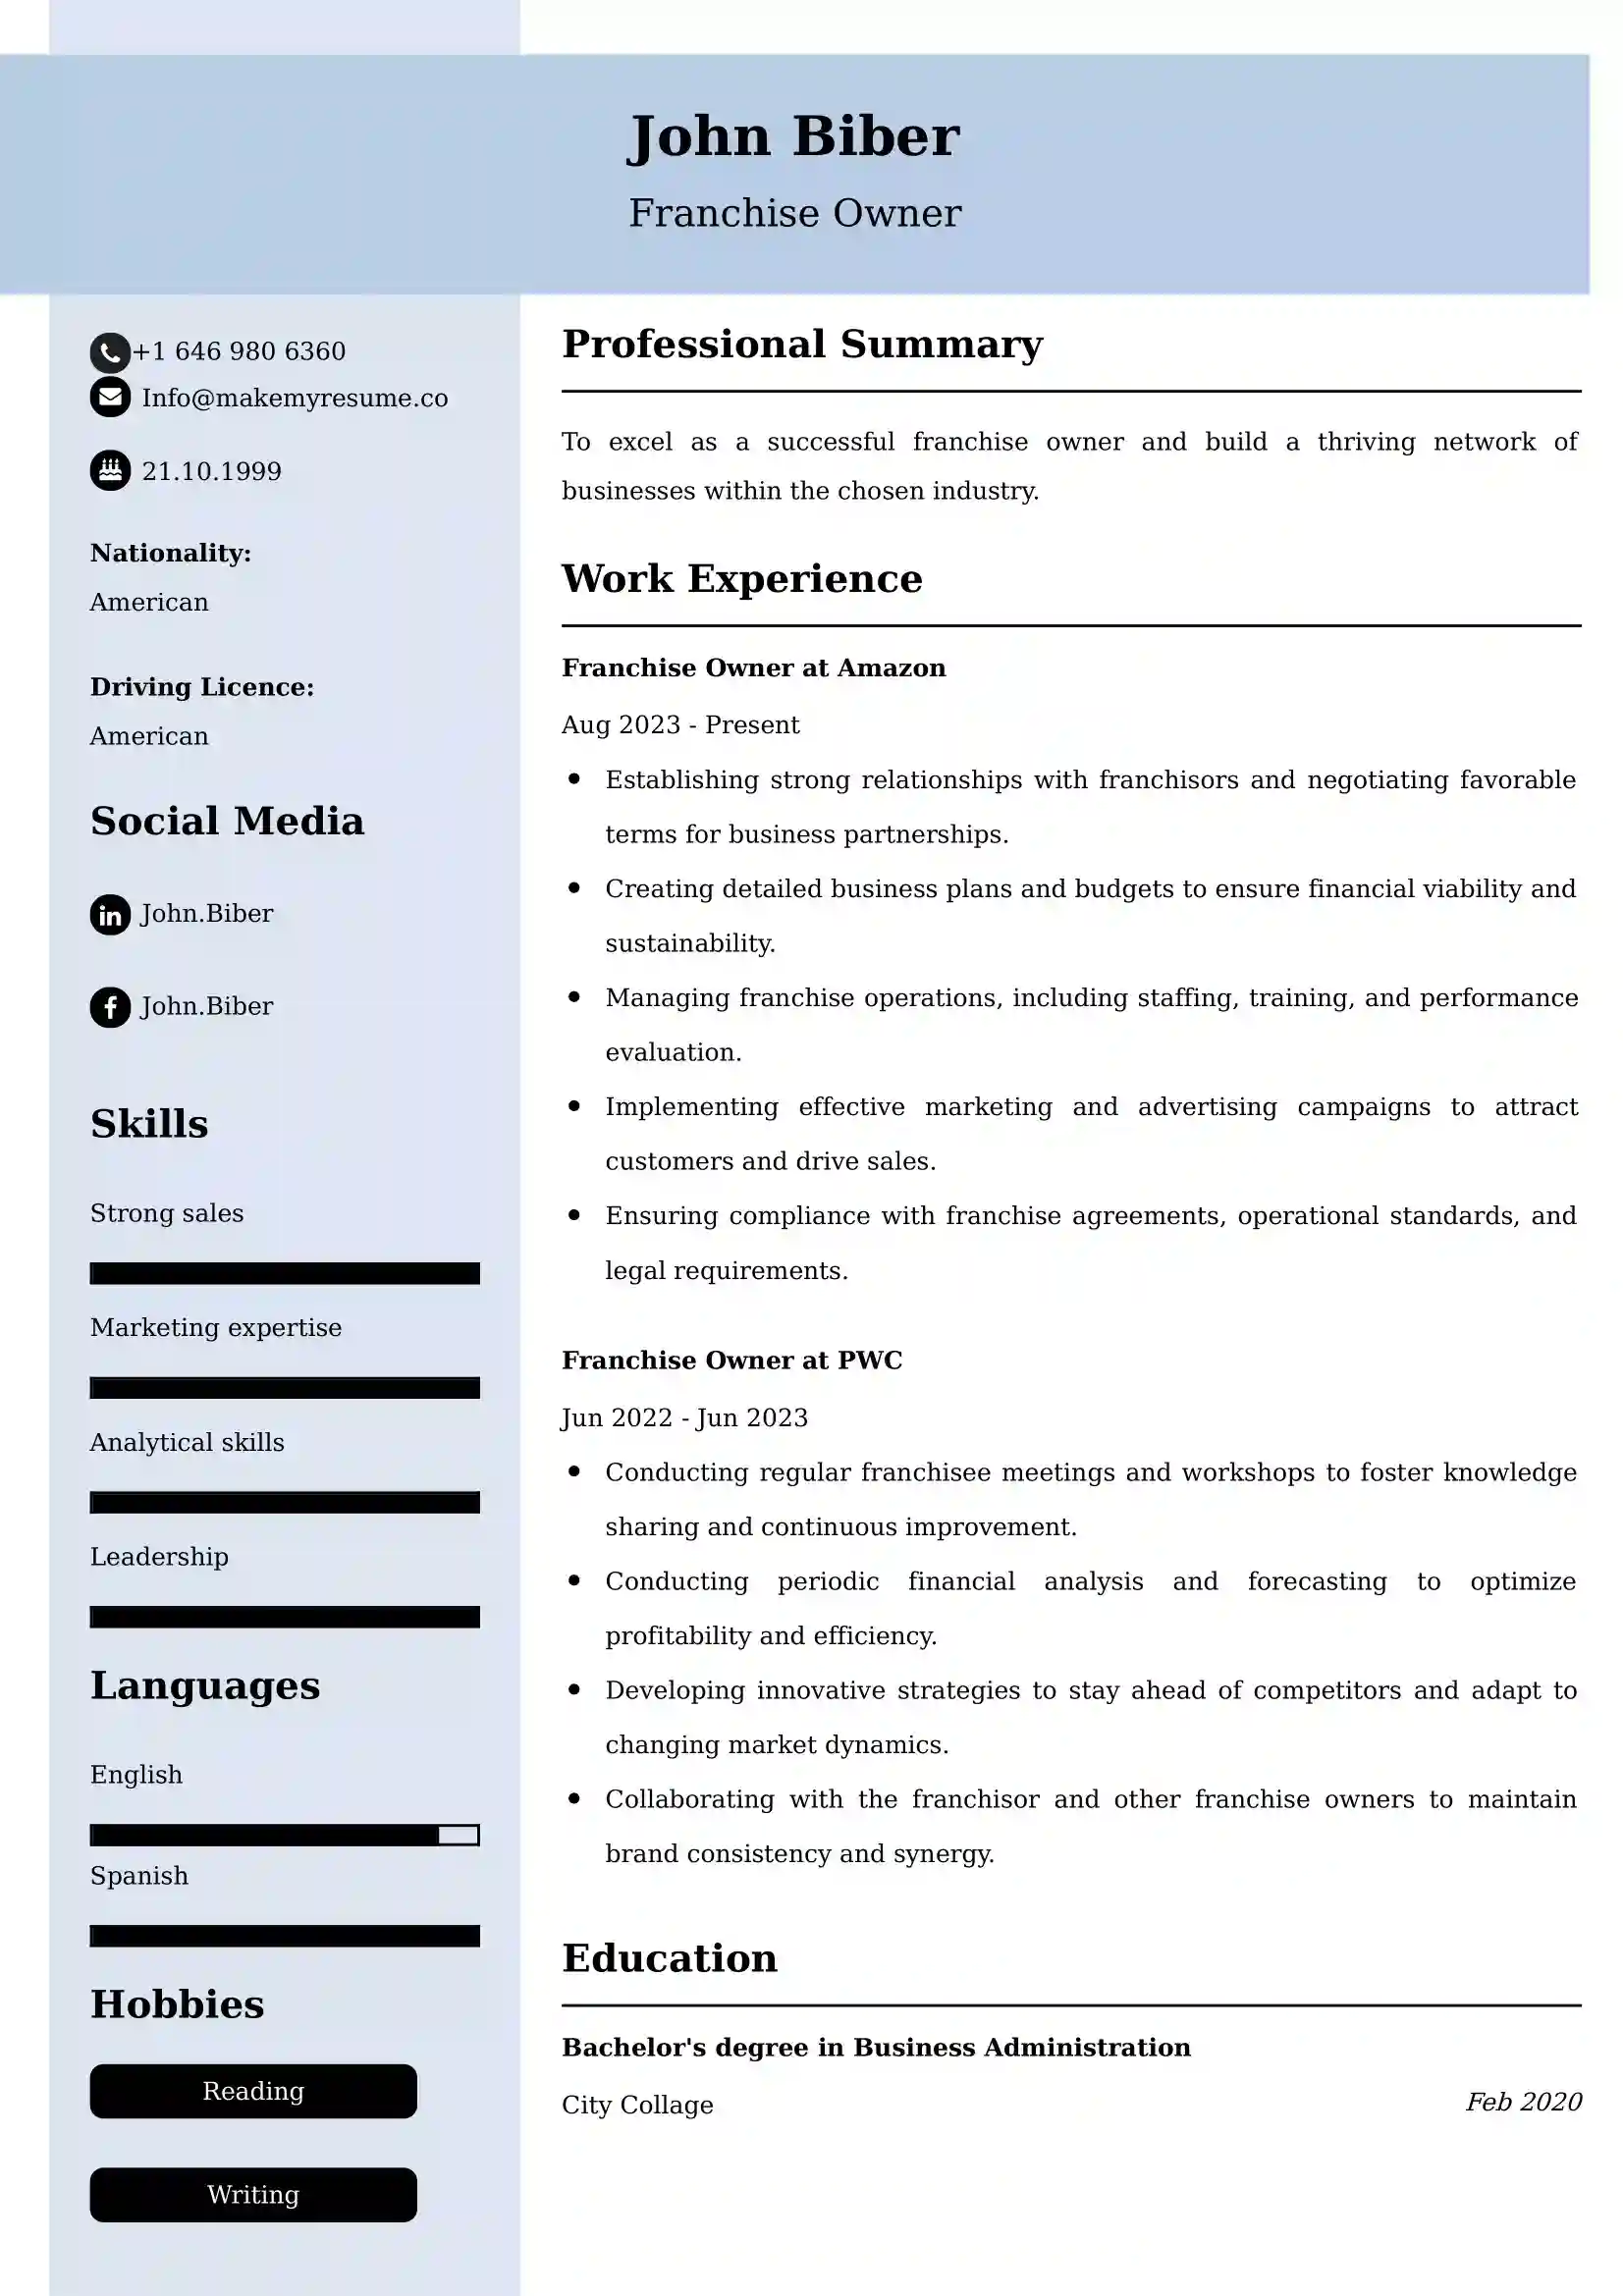 Franchise Owner Resume Examples India